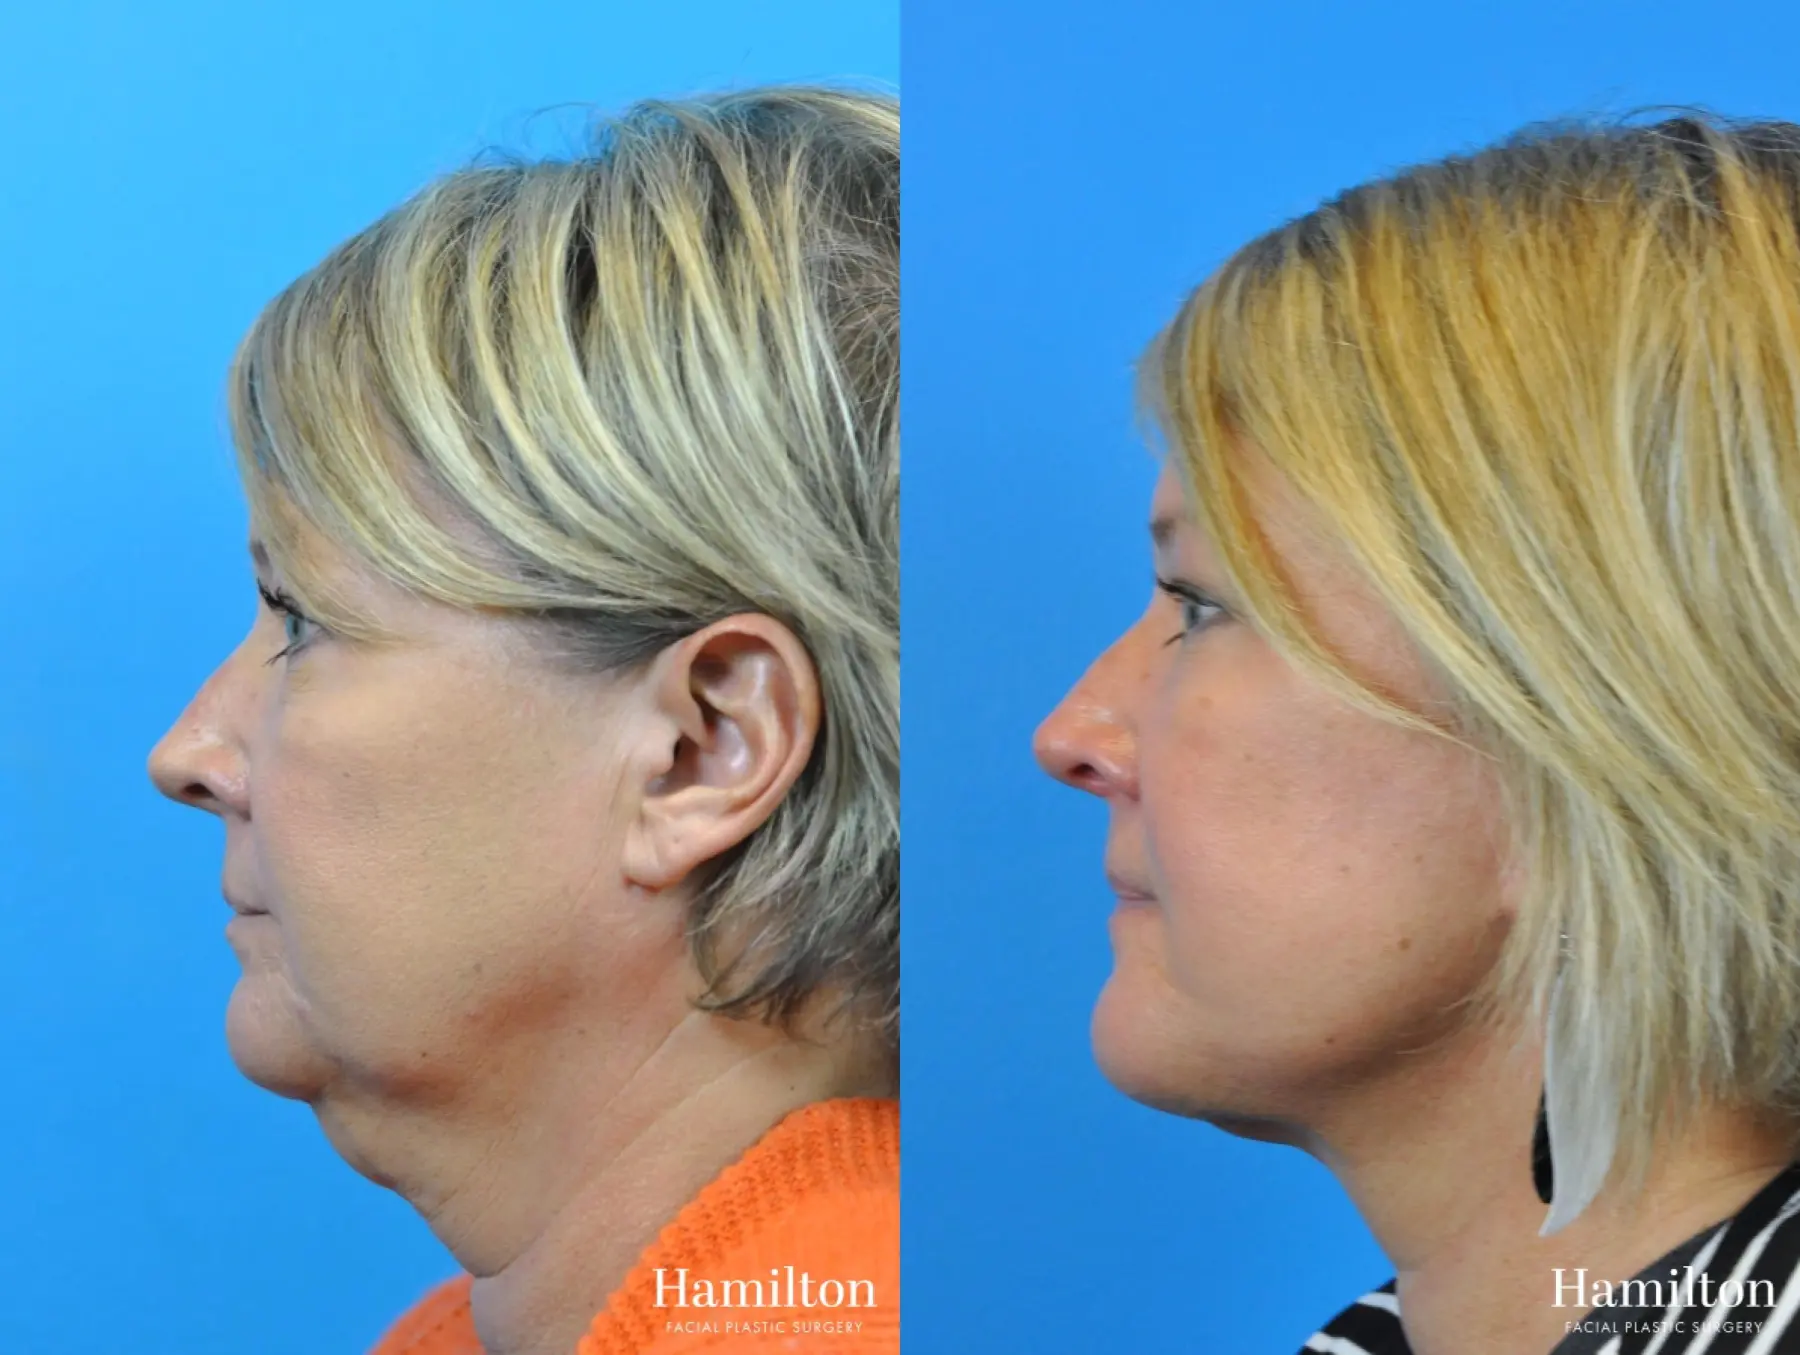 Facelift: Patient 6 - Before and After  